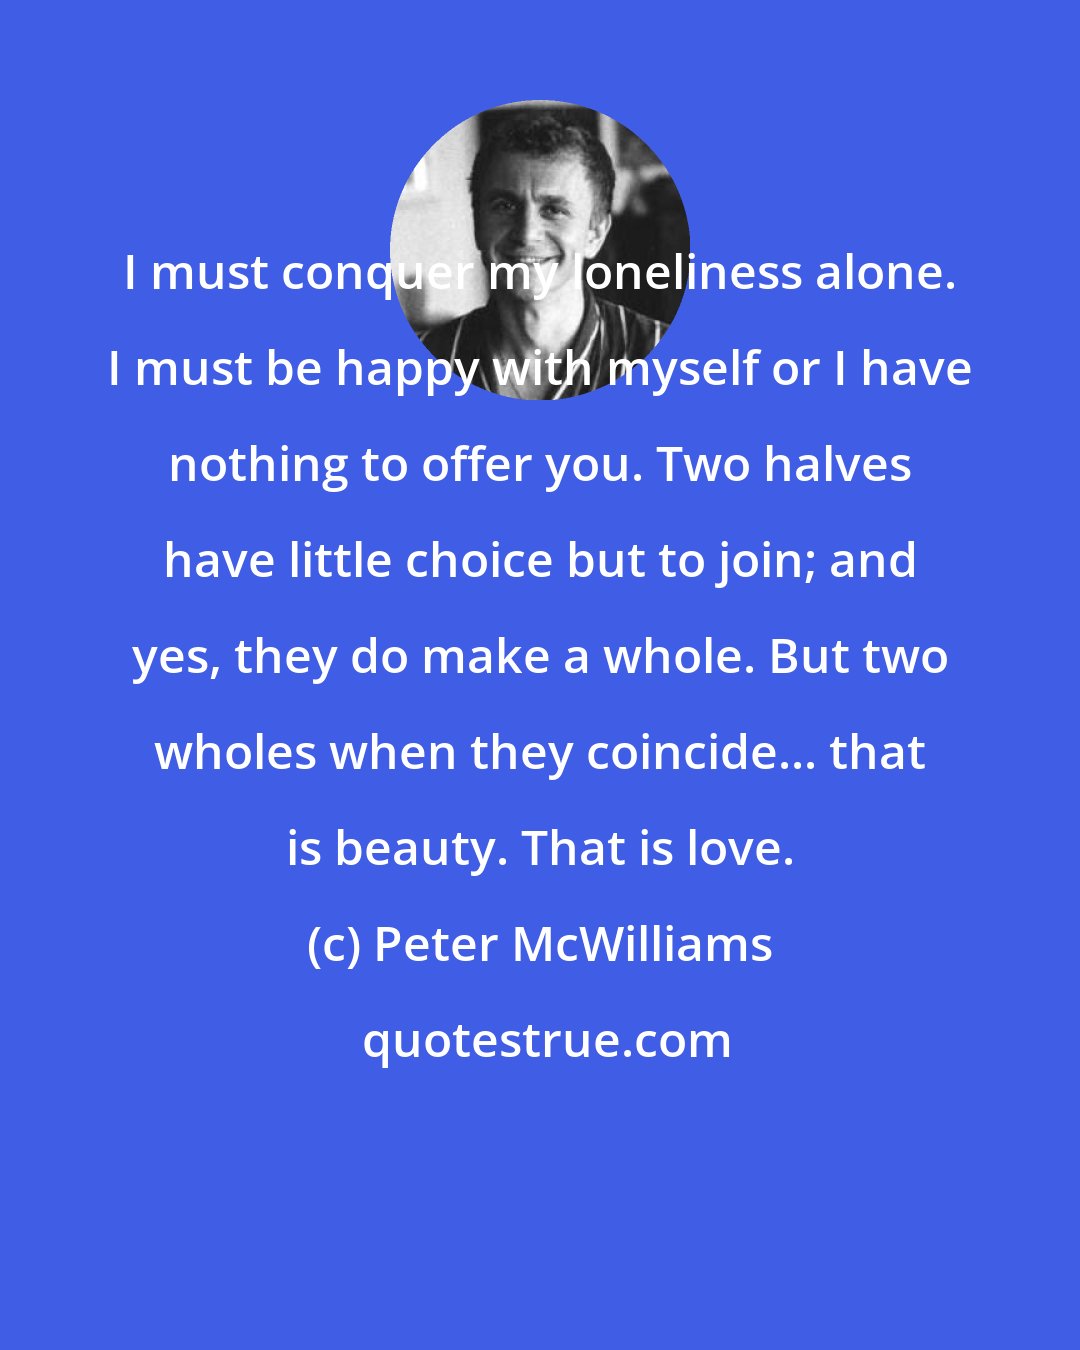 Peter McWilliams: I must conquer my loneliness alone. I must be happy with myself or I have nothing to offer you. Two halves have little choice but to join; and yes, they do make a whole. But two wholes when they coincide... that is beauty. That is love.